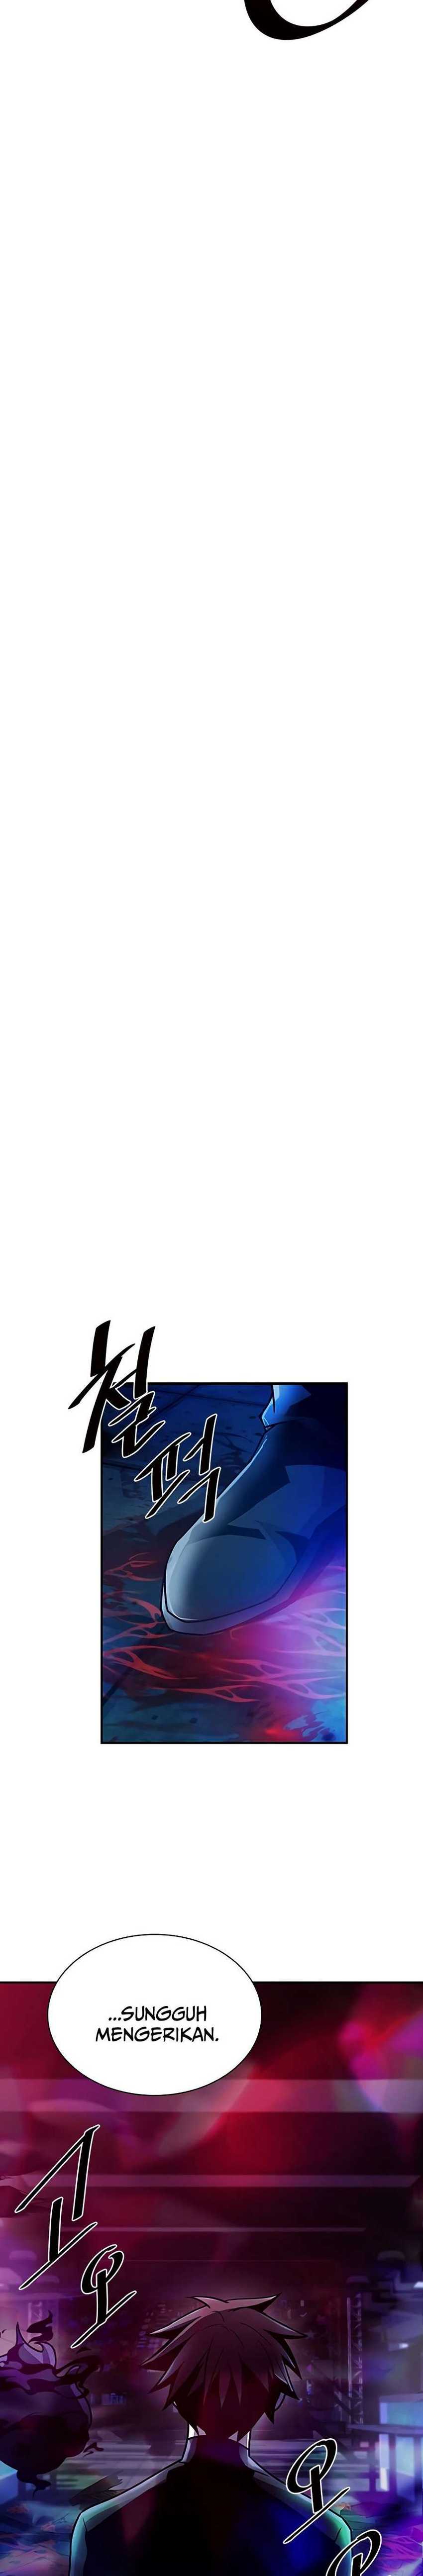 kill-to-villain Chapter chapter-23